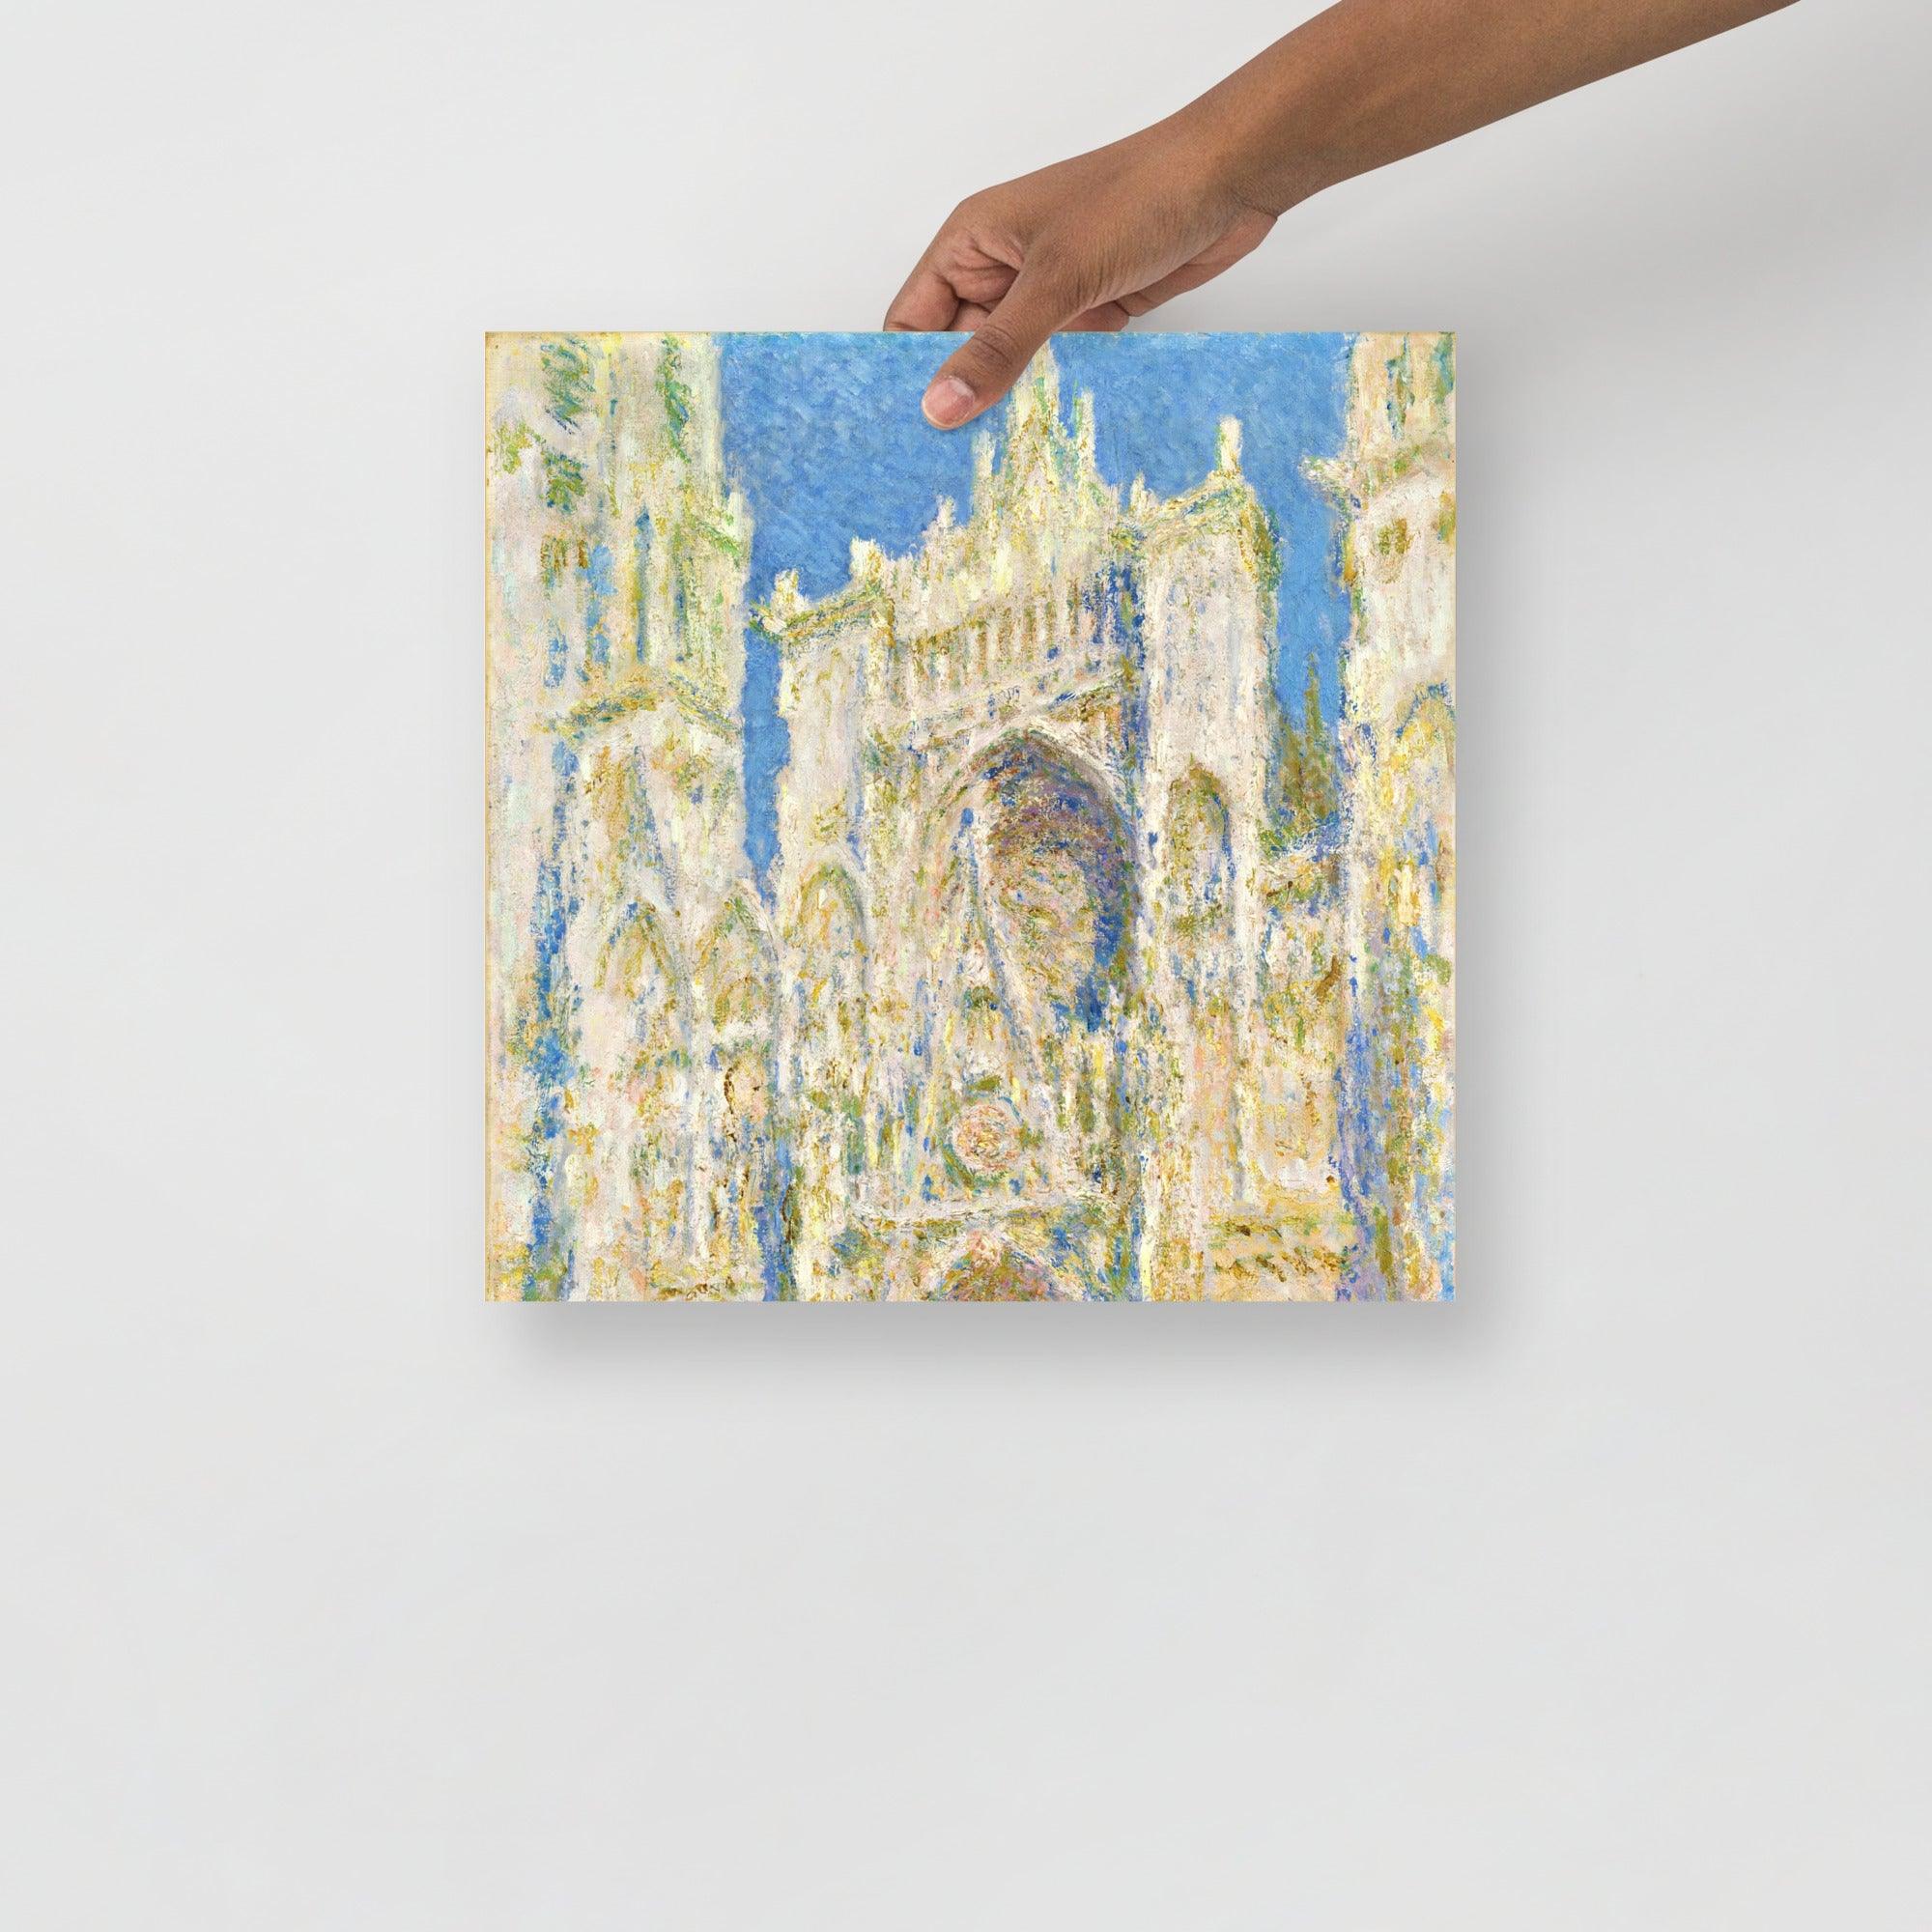 A Rouen Cathedral, West Facade by Claude Monet poster on a plain backdrop in size 14x14”.